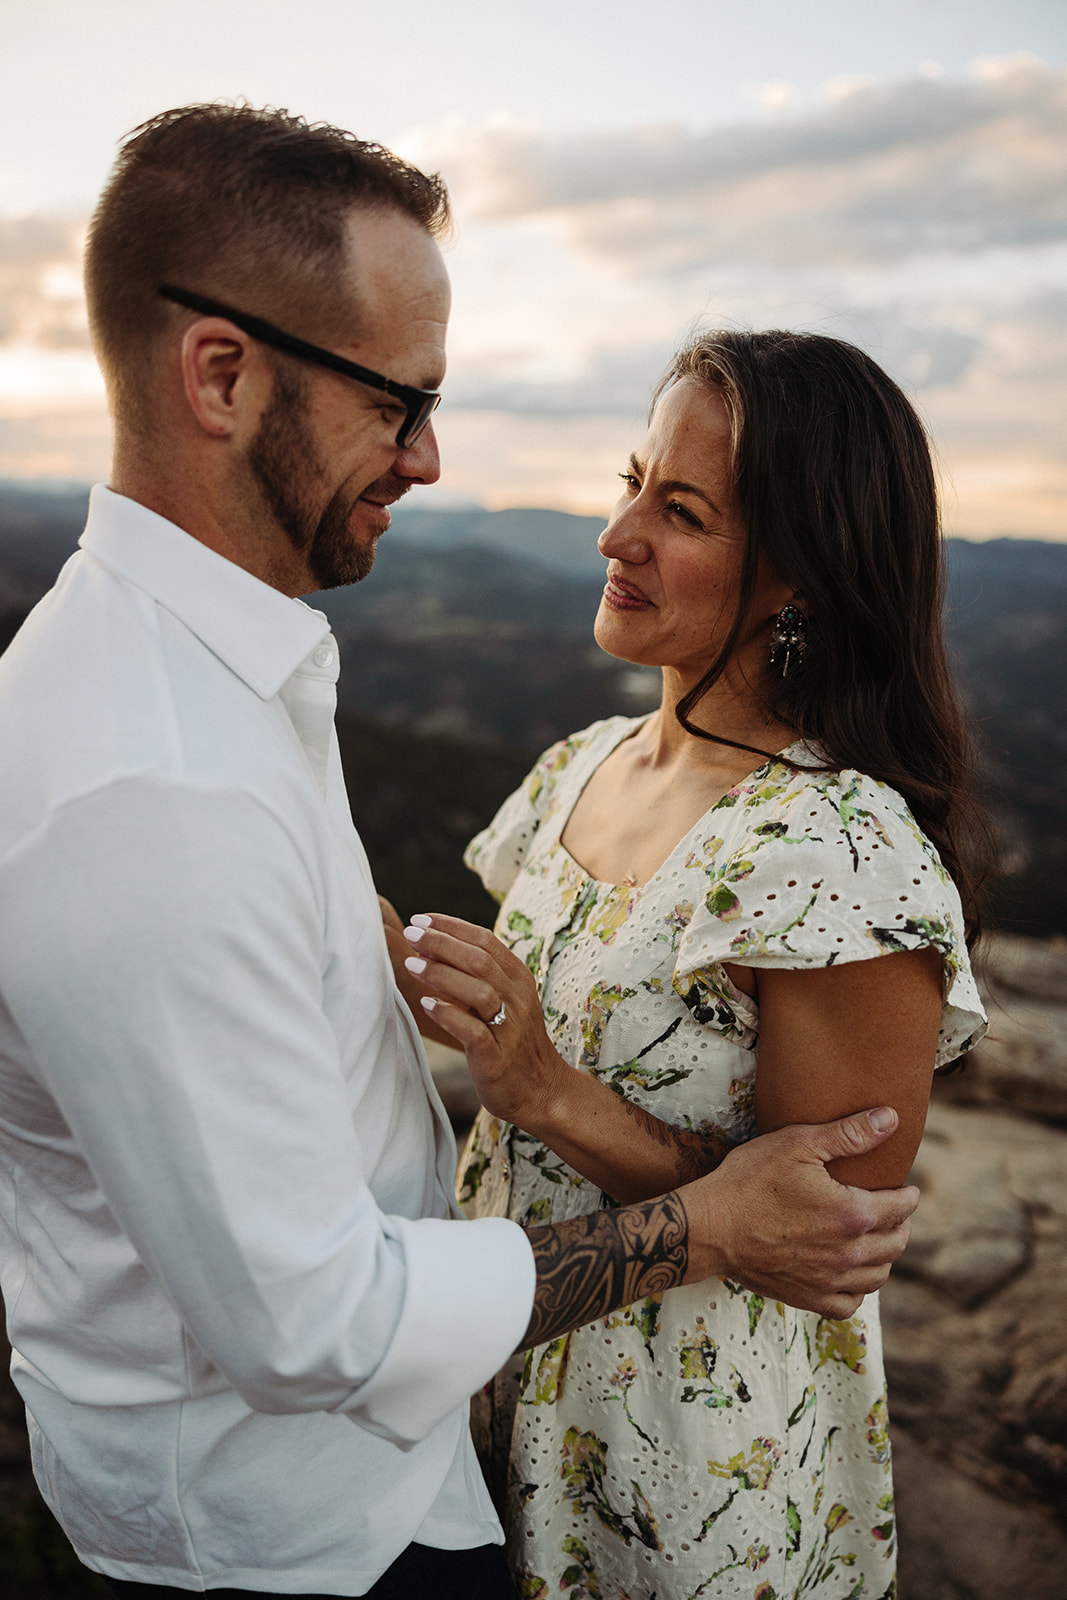 Man and woman smiling during sunset engagement session